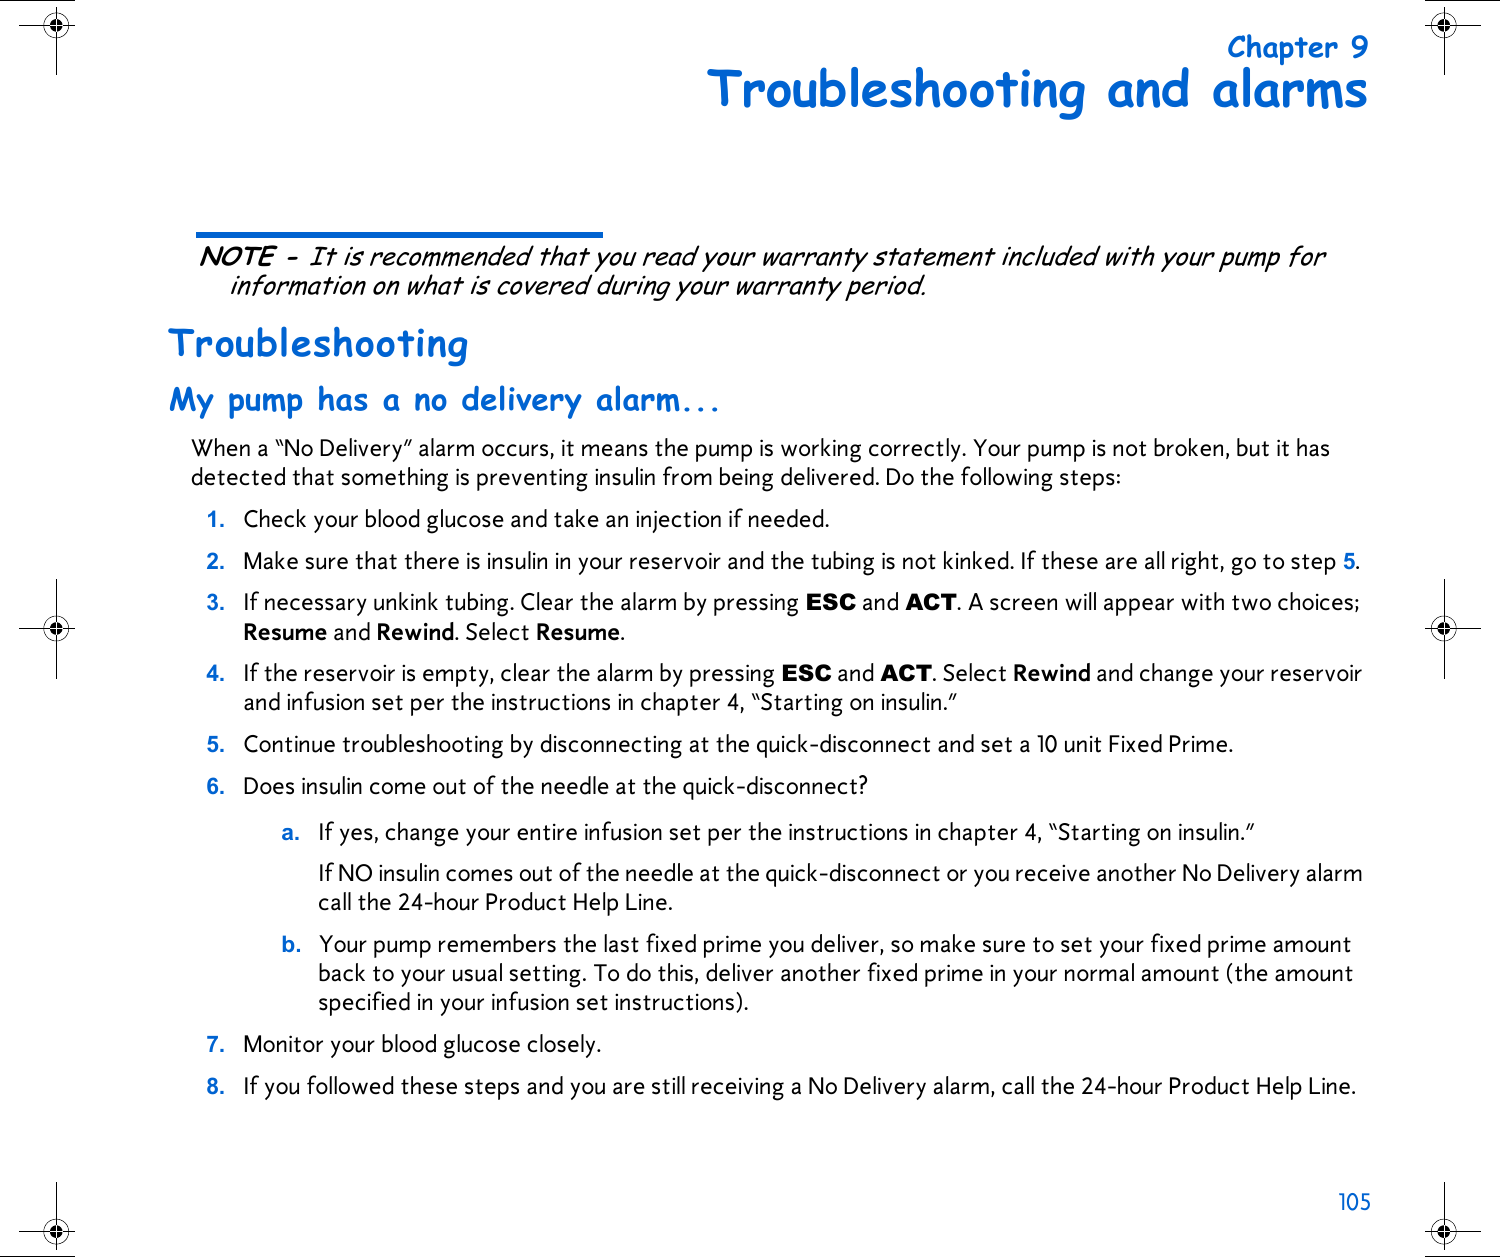 105 Chapter 9Troubleshooting and alarmsNOTE - It is recommended that you read your warranty statement included with your pump for information on what is covered during your warranty period.TroubleshootingMy pump has a no delivery alarm...When a “No Delivery” alarm occurs, it means the pump is working correctly. Your pump is not broken, but it has detected that something is preventing insulin from being delivered. Do the following steps:1. Check your blood glucose and take an injection if needed.2. Make sure that there is insulin in your reservoir and the tubing is not kinked. If these are all right, go to step 5.3. If necessary unkink tubing. Clear the alarm by pressing ESC and ACT. A screen will appear with two choices; Resume and Rewind. Select Resume.4. If the reservoir is empty, clear the alarm by pressing ESC and ACT. Select Rewind and change your reservoir and infusion set per the instructions in chapter 4, “Starting on insulin.” 5. Continue troubleshooting by disconnecting at the quick-disconnect and set a 10 unit Fixed Prime. 6. Does insulin come out of the needle at the quick-disconnect? a. If yes, change your entire infusion set per the instructions in chapter 4, “Starting on insulin.” If NO insulin comes out of the needle at the quick-disconnect or you receive another No Delivery alarm call the 24-hour Product Help Line.b. Your pump remembers the last fixed prime you deliver, so make sure to set your fixed prime amount back to your usual setting. To do this, deliver another fixed prime in your normal amount (the amount specified in your infusion set instructions).7. Monitor your blood glucose closely.8. If you followed these steps and you are still receiving a No Delivery alarm, call the 24-hour Product Help Line.